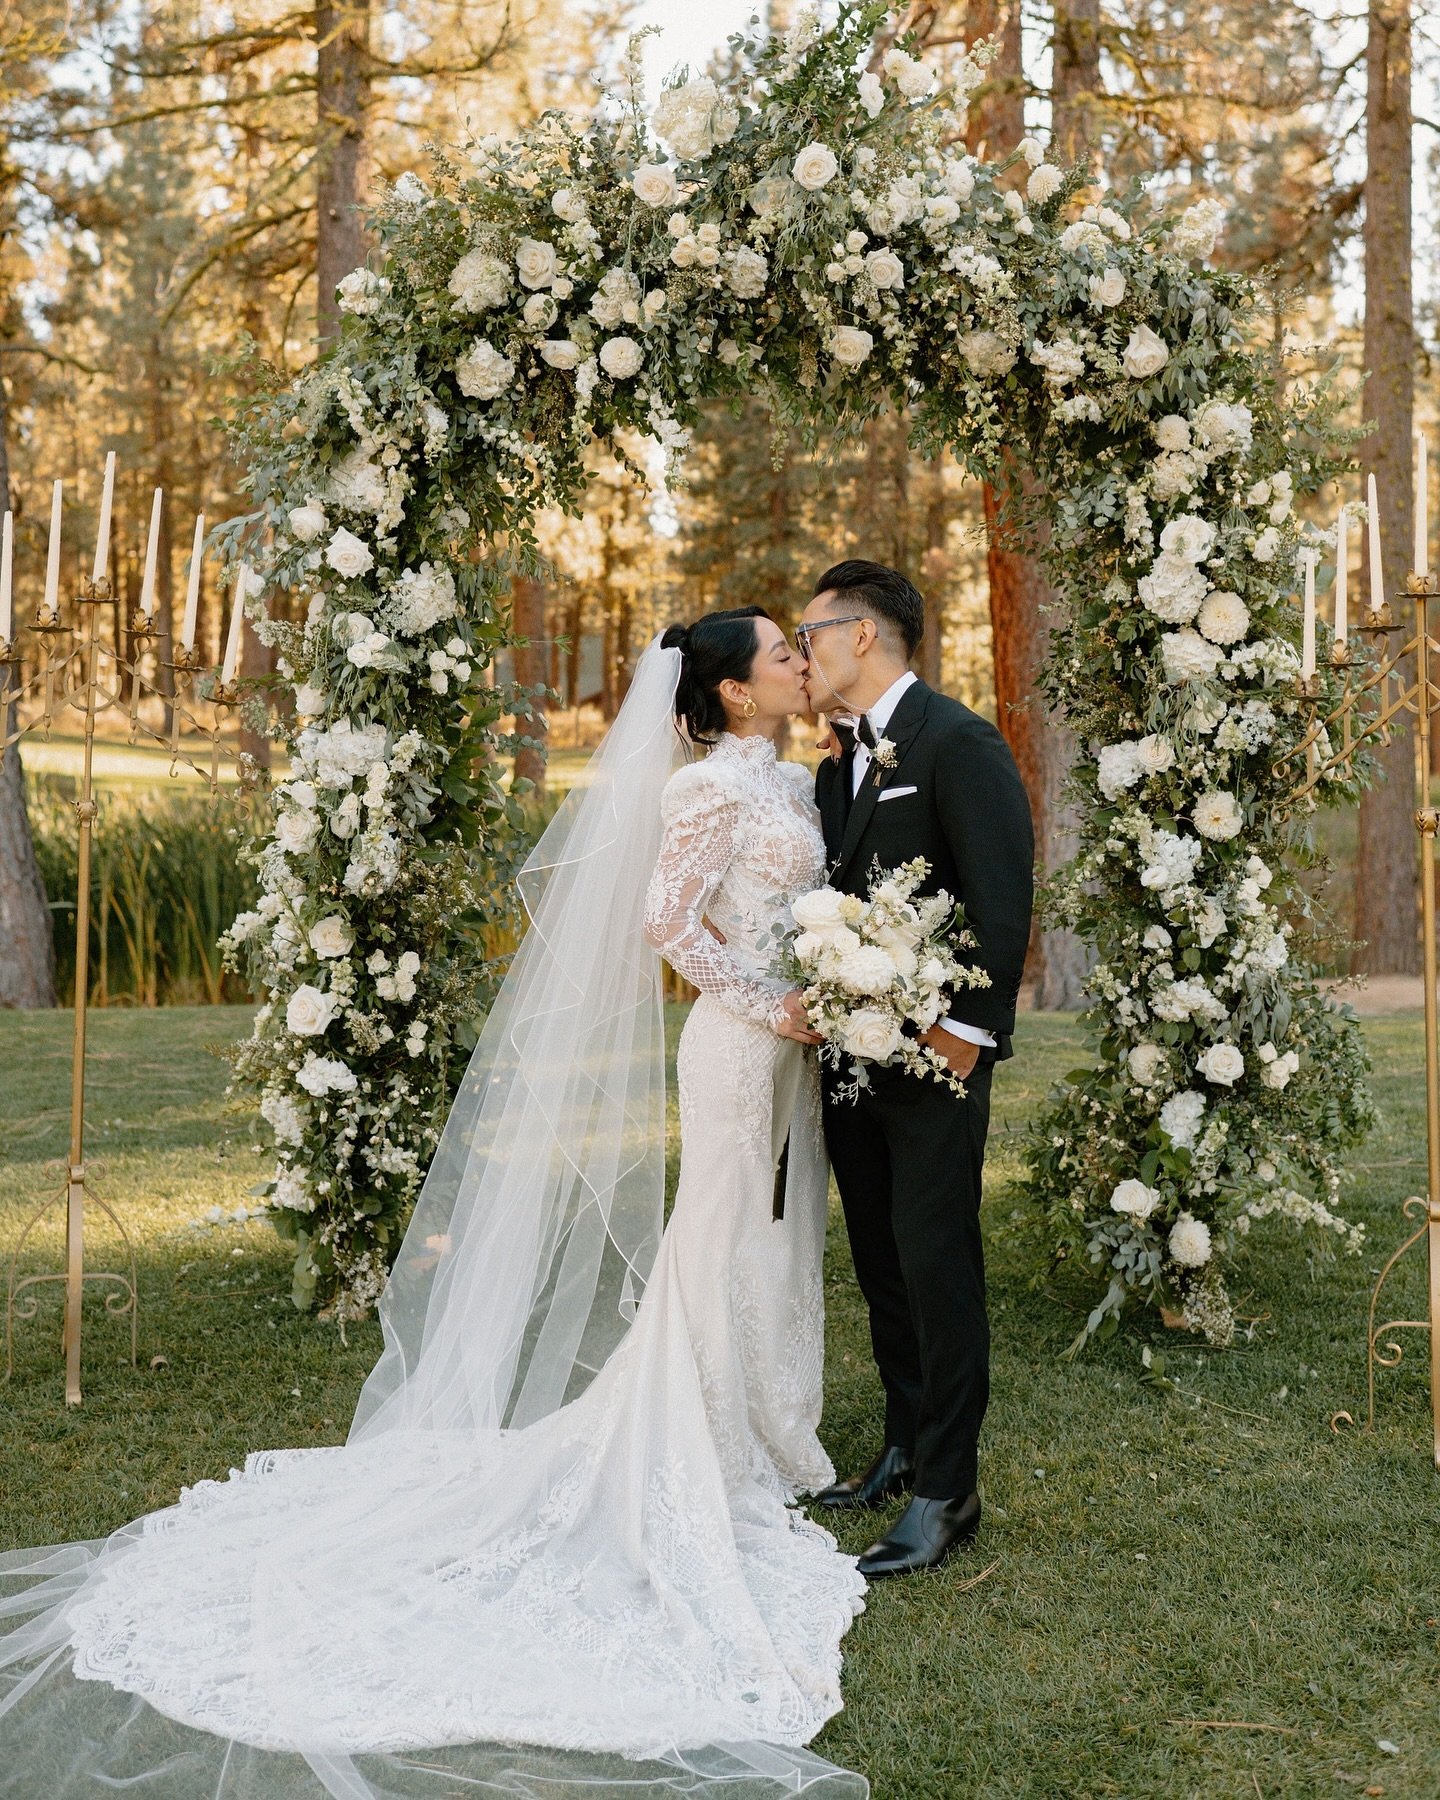 A white wedding amongst the pines. ✨🤍🌲 Such a beautiful day for S + C. 

Photographer: @peytonrbyford 
Florist: @irisandbarryblooms 
Venue: @chaletviewlodge 

Keywords: Lake Tahoe, Tahoe, wedding, Truckee, florist, Olympic Valley, Graeagle, arch, a